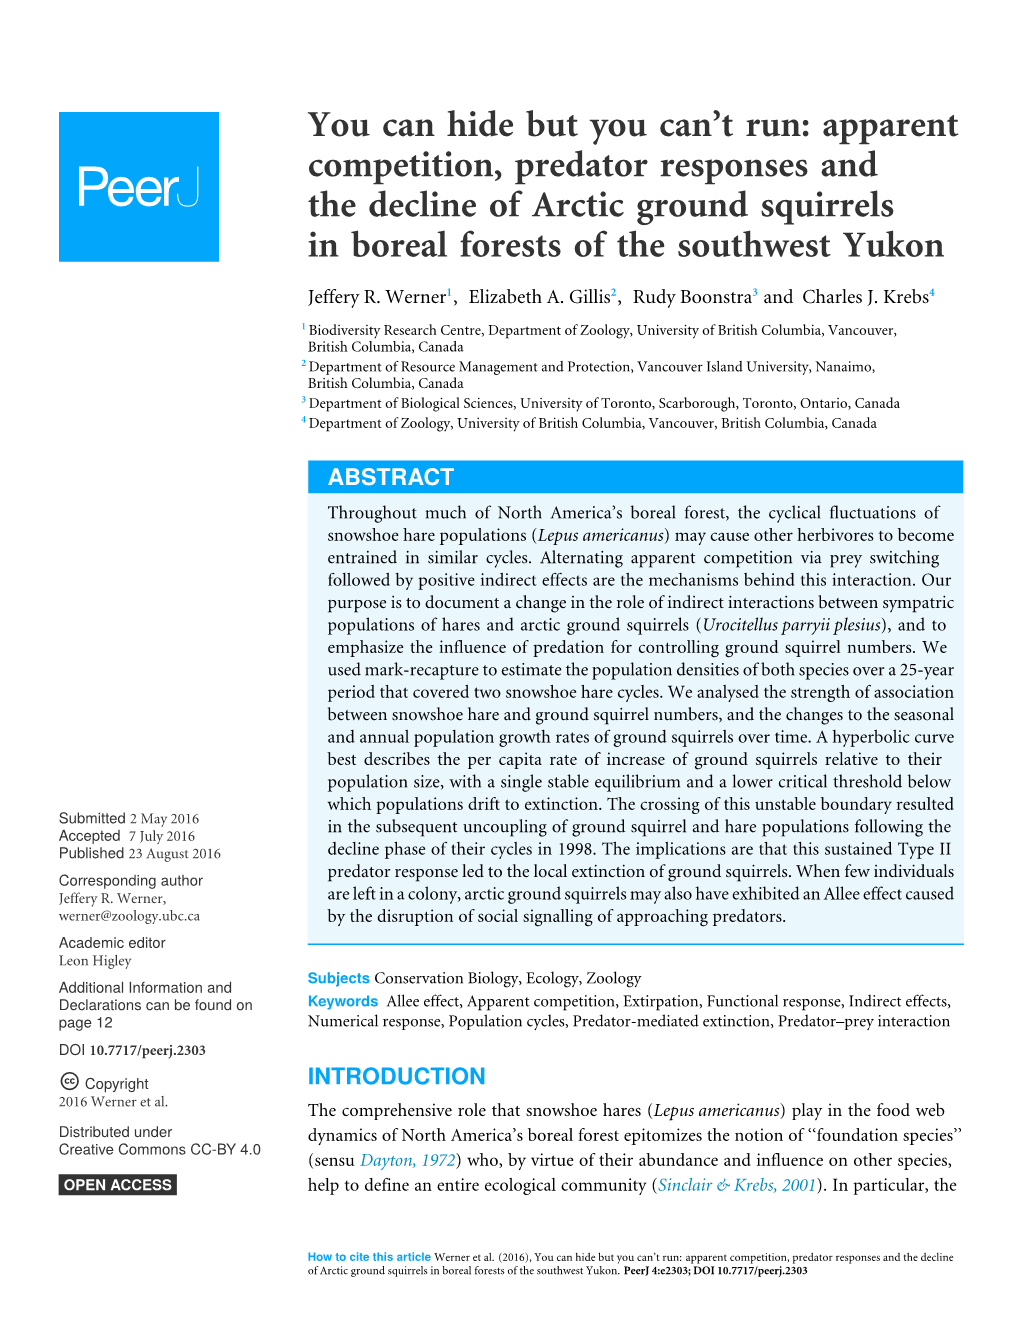 Apparent Competition, Predator Responses and the Decline of Arctic Ground Squirrels in Boreal Forests of the Southwest Yukon